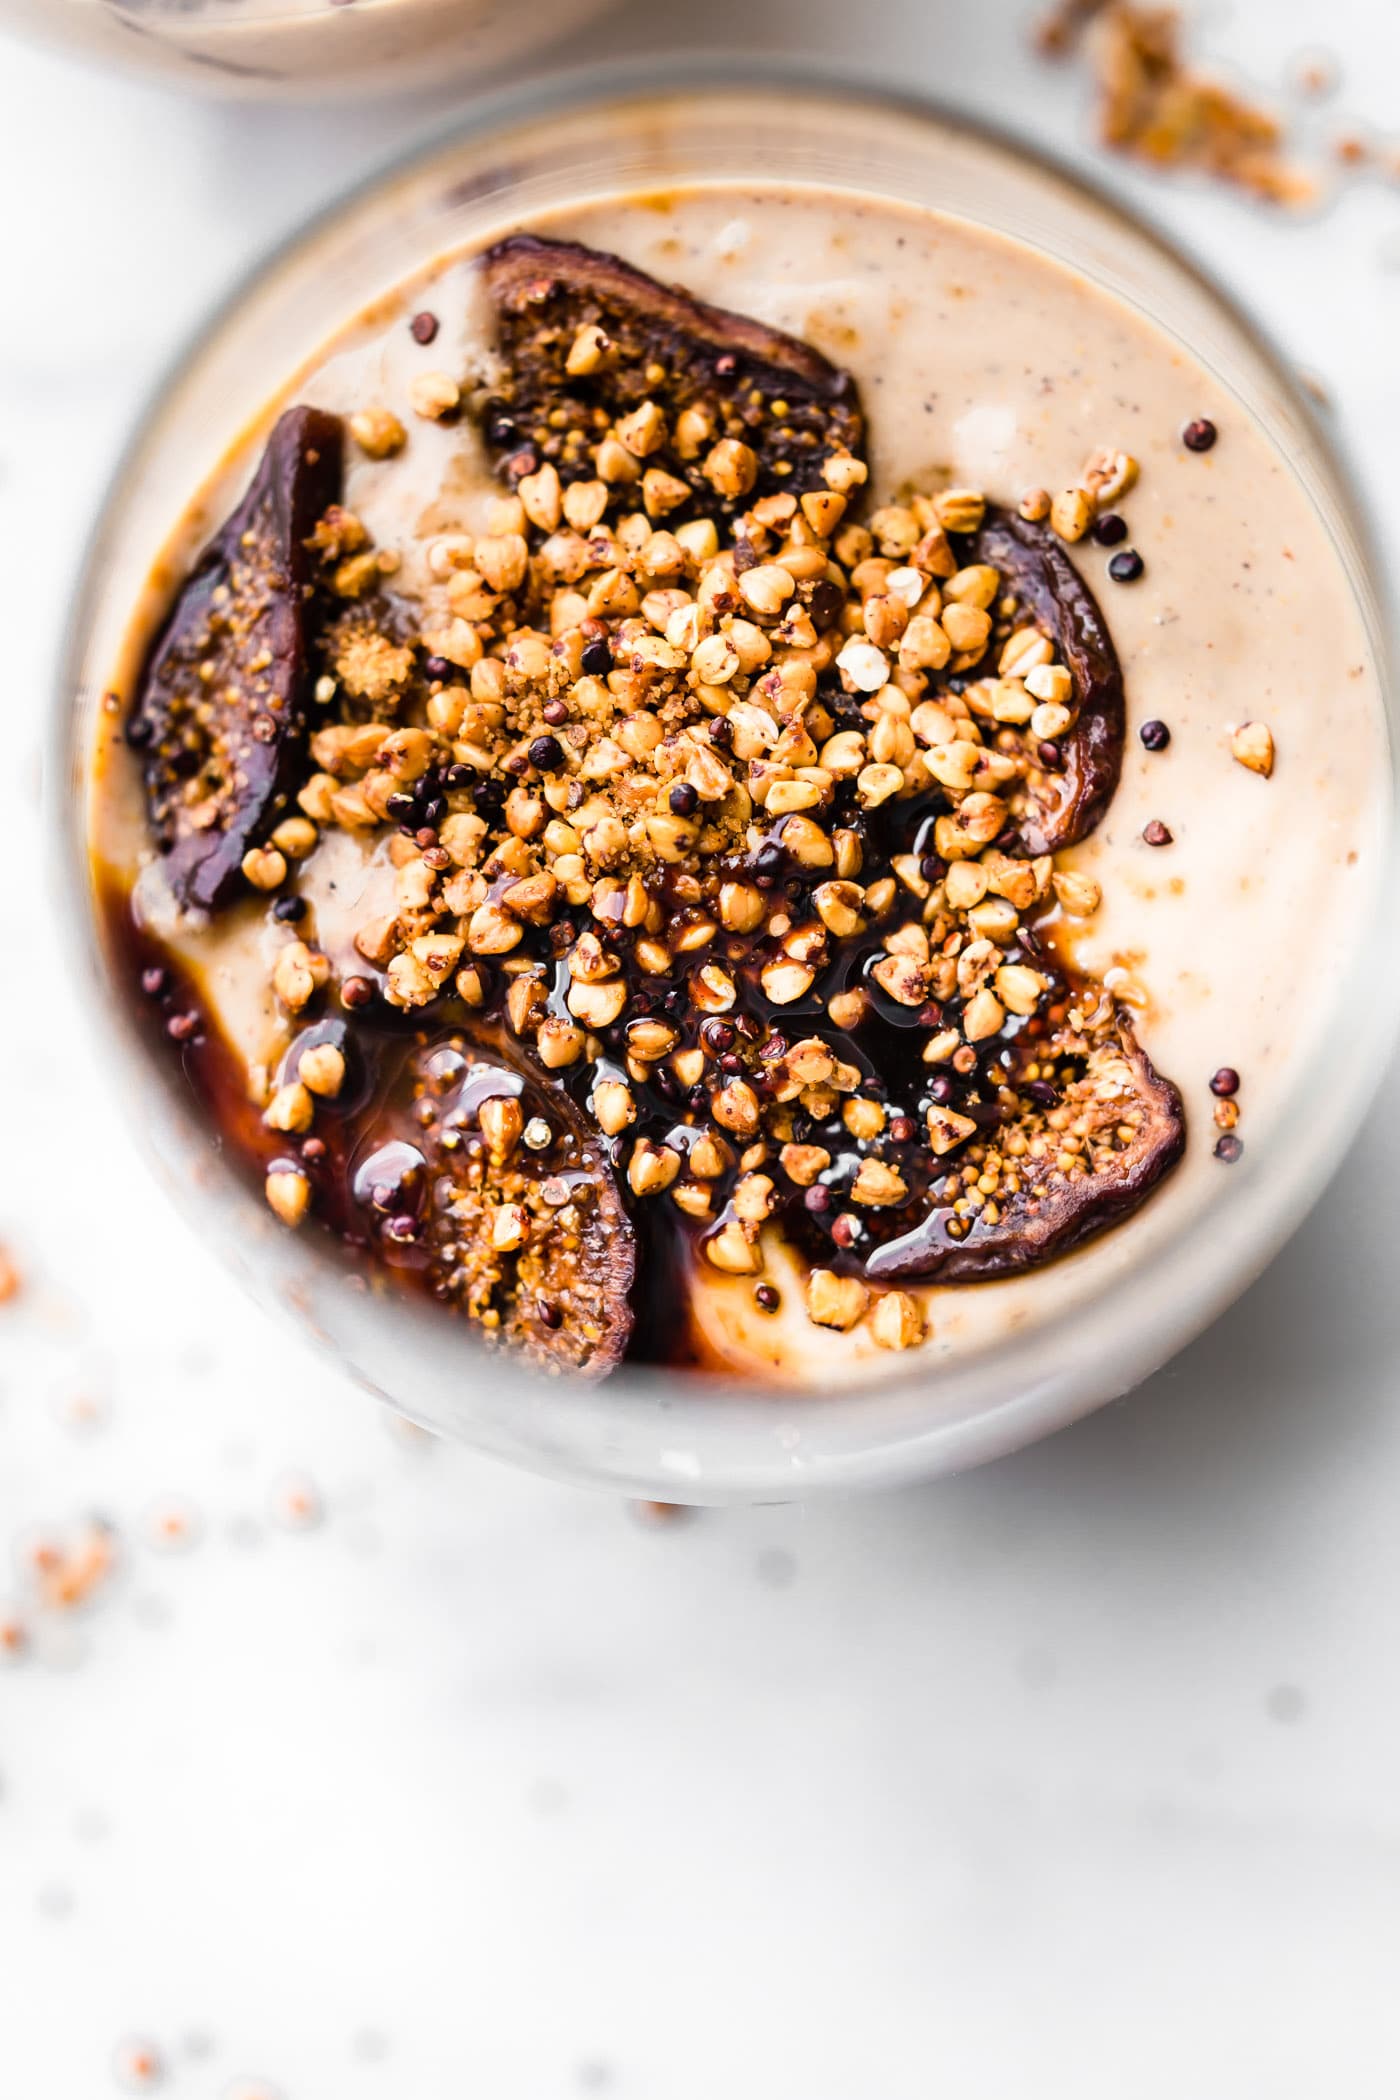 Creamy Fig Yogurt Breakfast Parfait Cups! A healthy gluten-free breakfast with a fiber boost! A Blended Yogurt Cup with dried California Mission Figs, chia seed, a drizzle of molasses, and a cinnamon toasted Buckwheat topping! Ya'll, this is so heavenly! Simple ingredients, energizing, quick to make, and oh so delicious